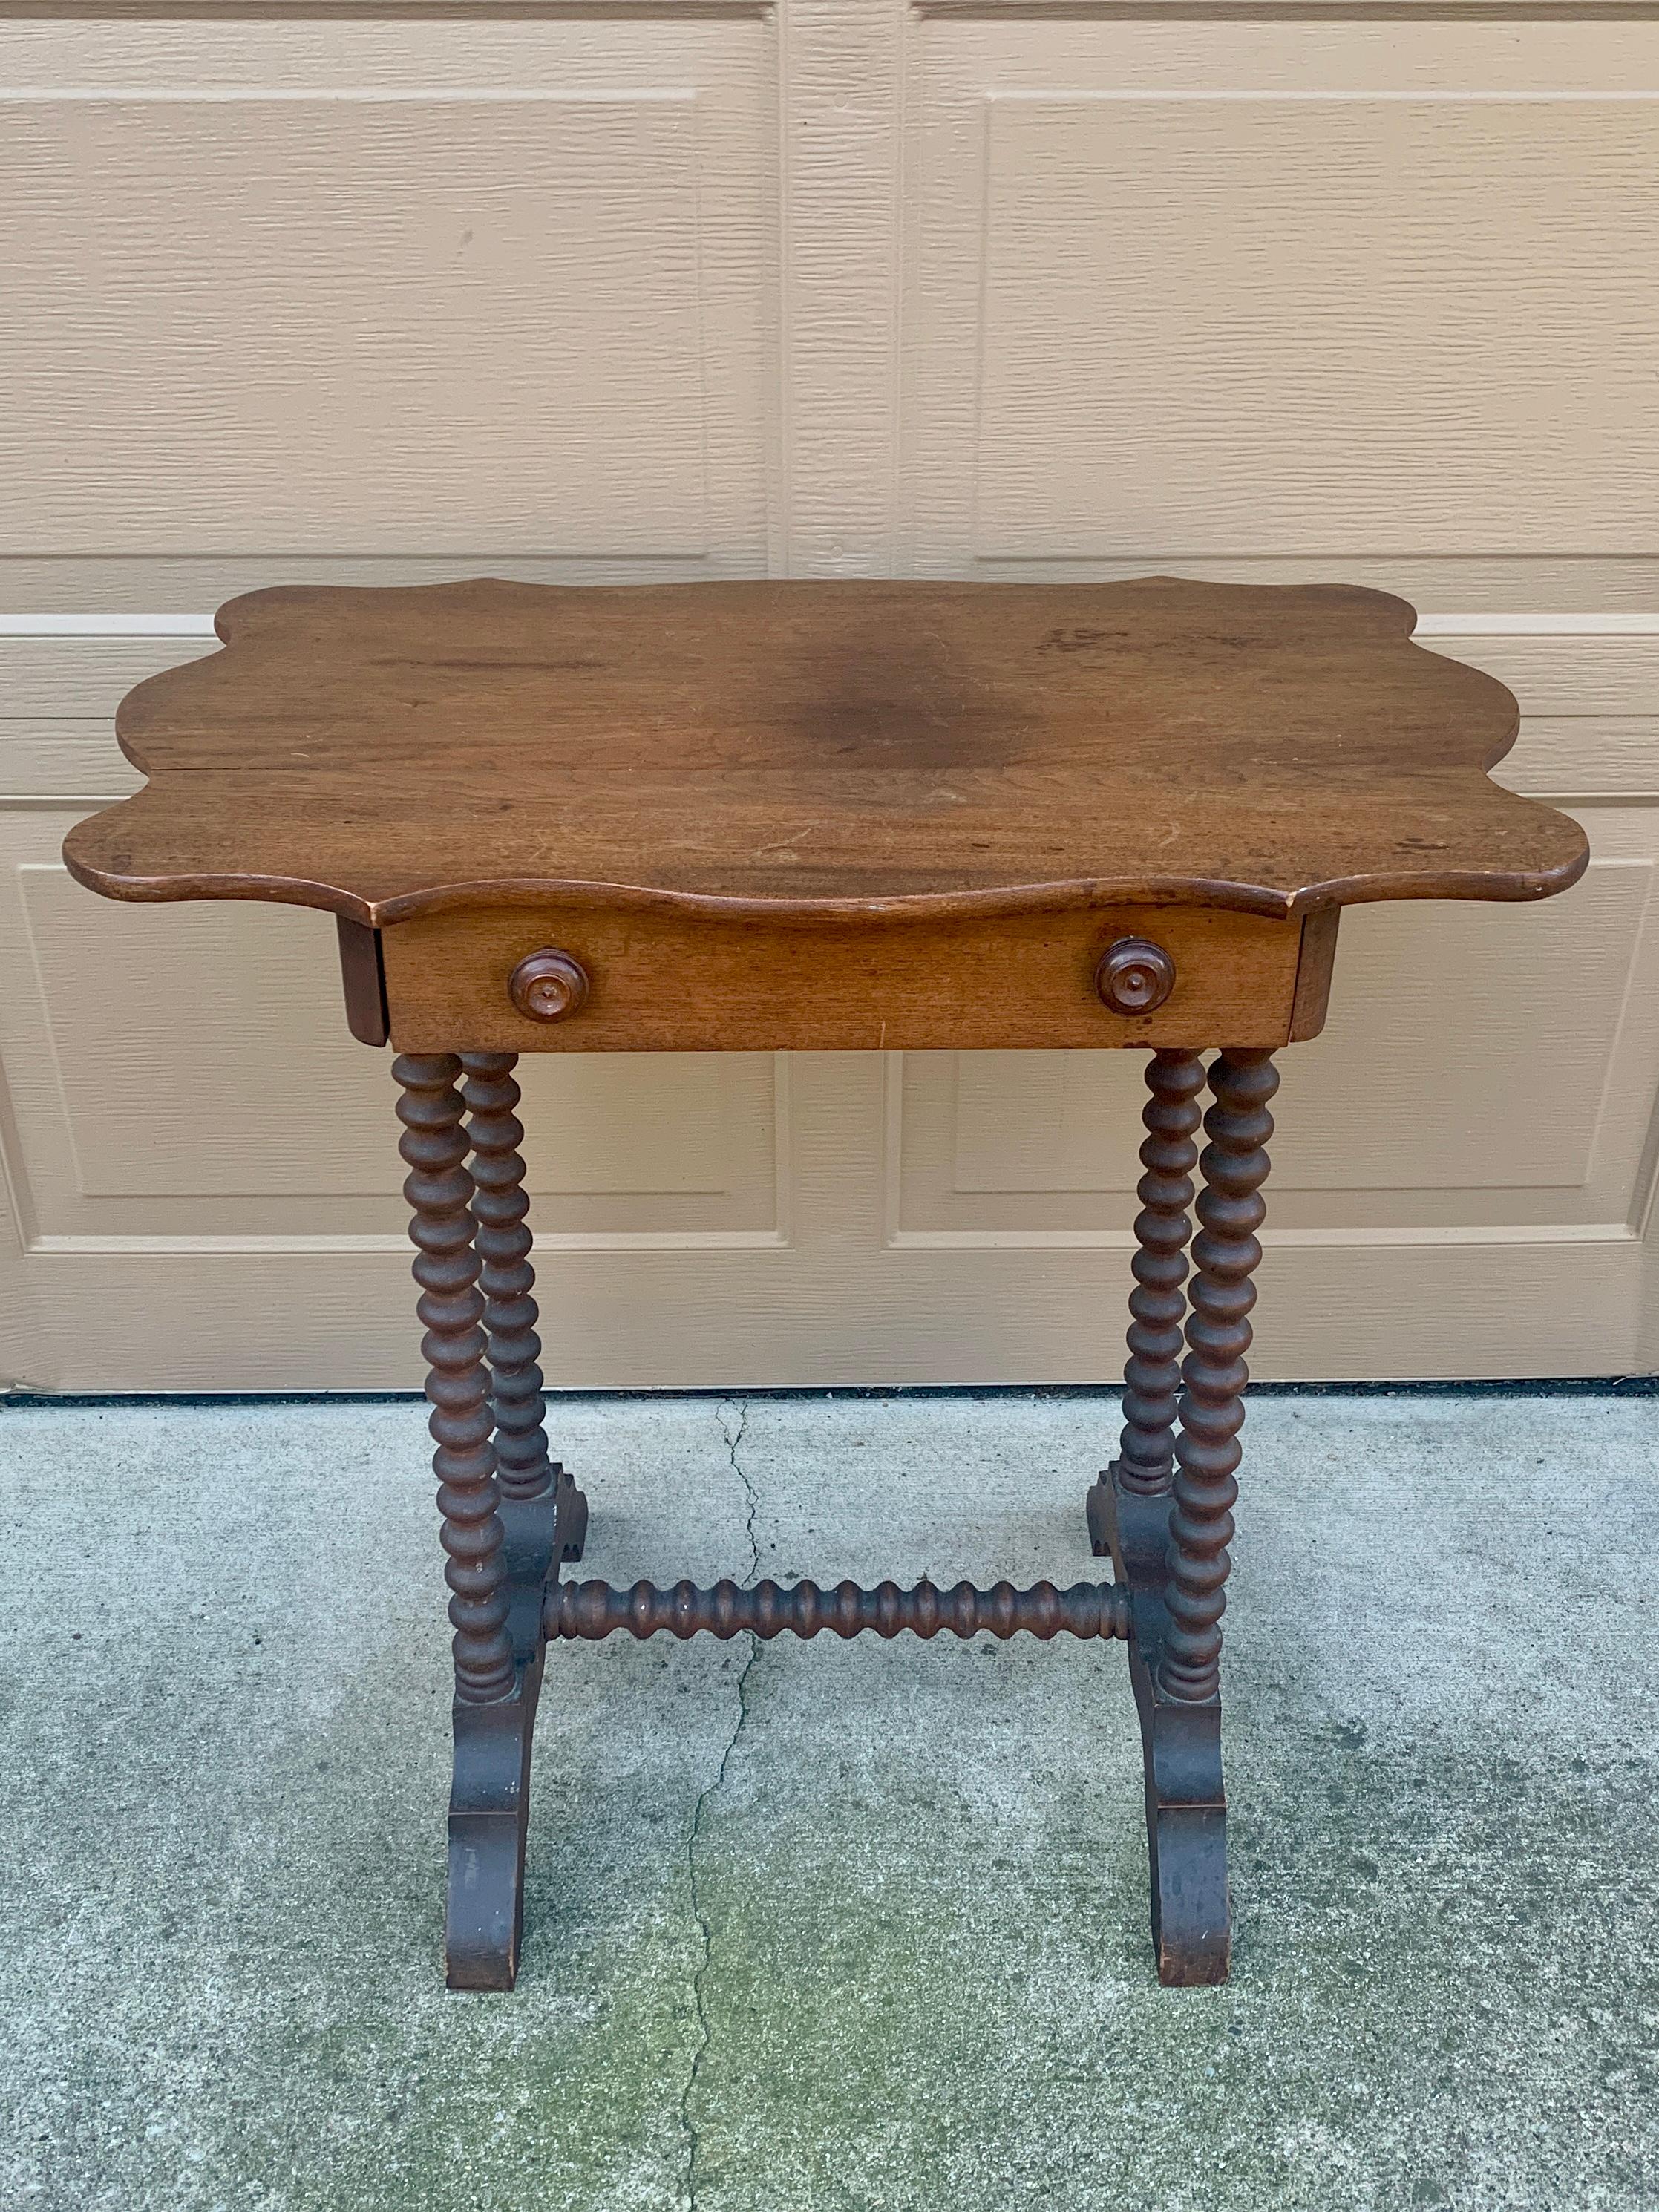 A gorgeous American Colonial or Victorian oak one-drawer occasional side table with bobbin turned legs and stretcher

USA, Circa late 19th century

Measures: 29